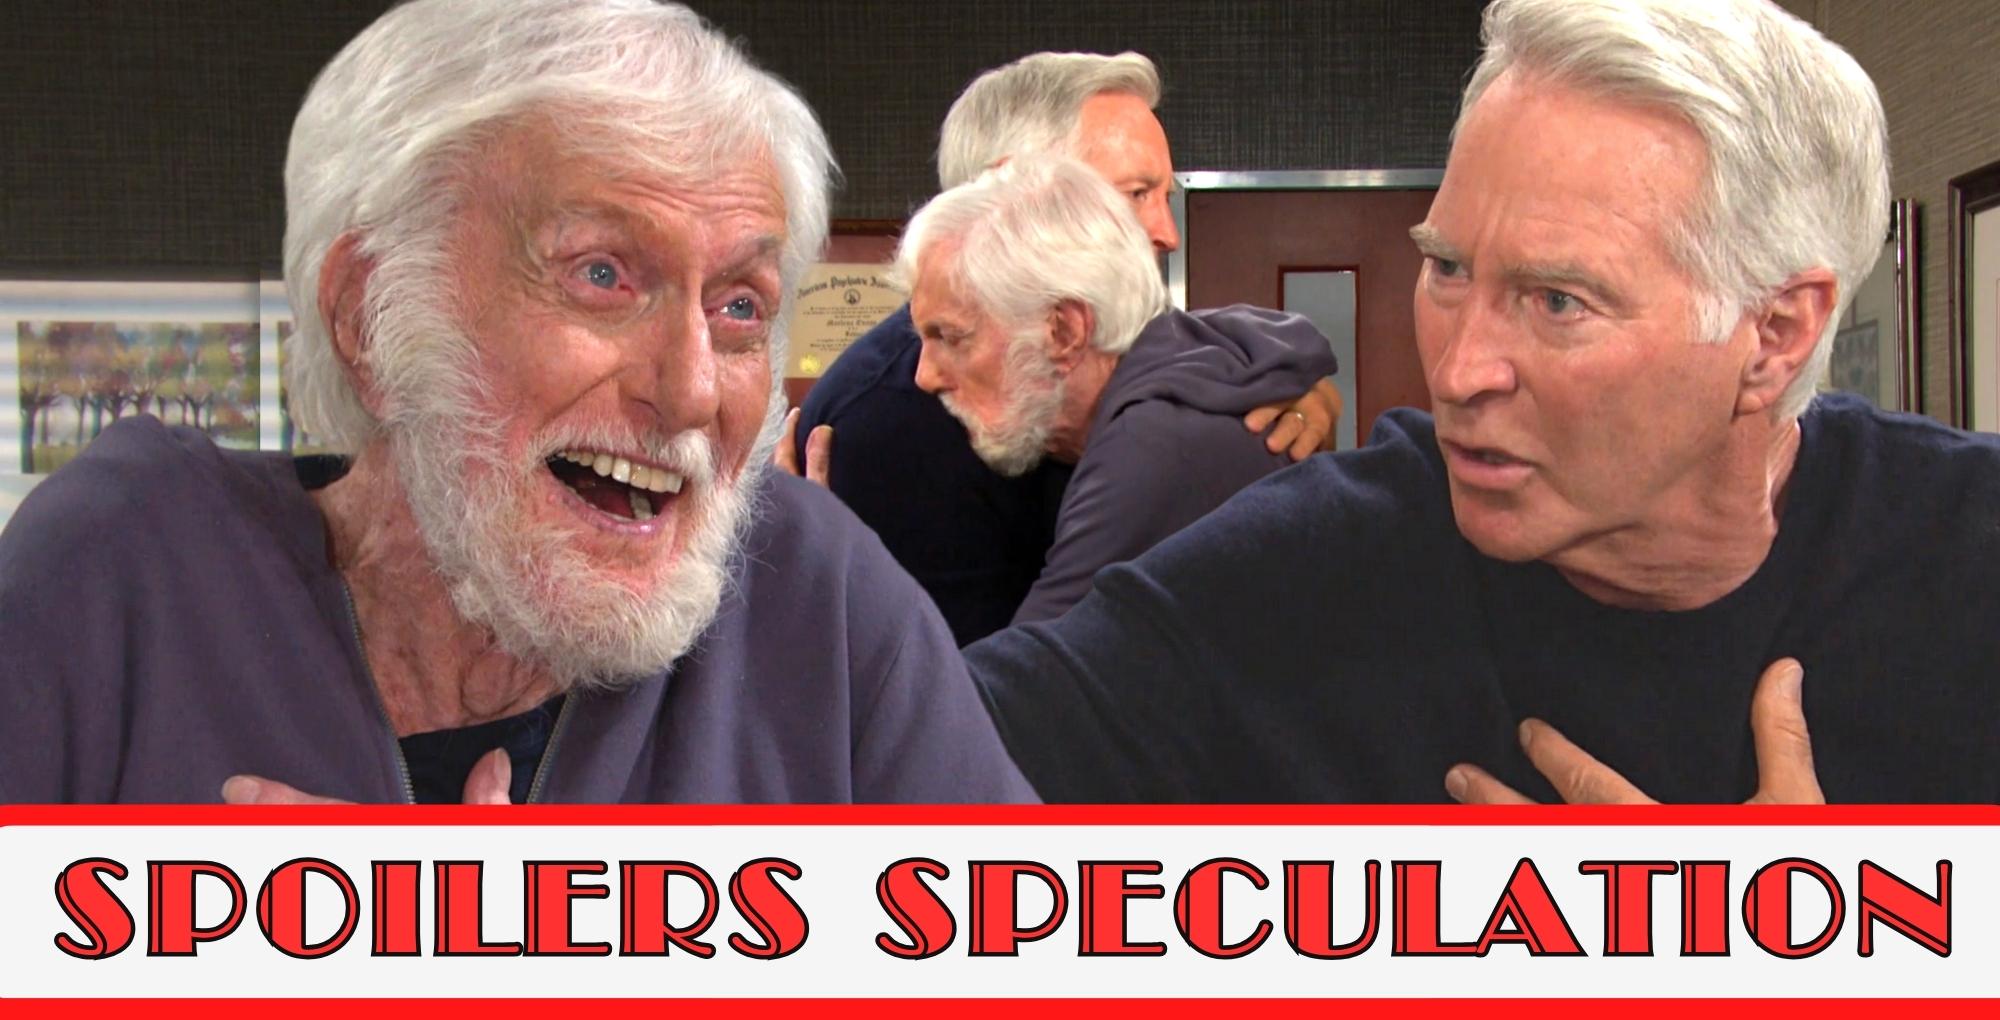 days spoilers speculation banner with timothy and john and them hugging as well.